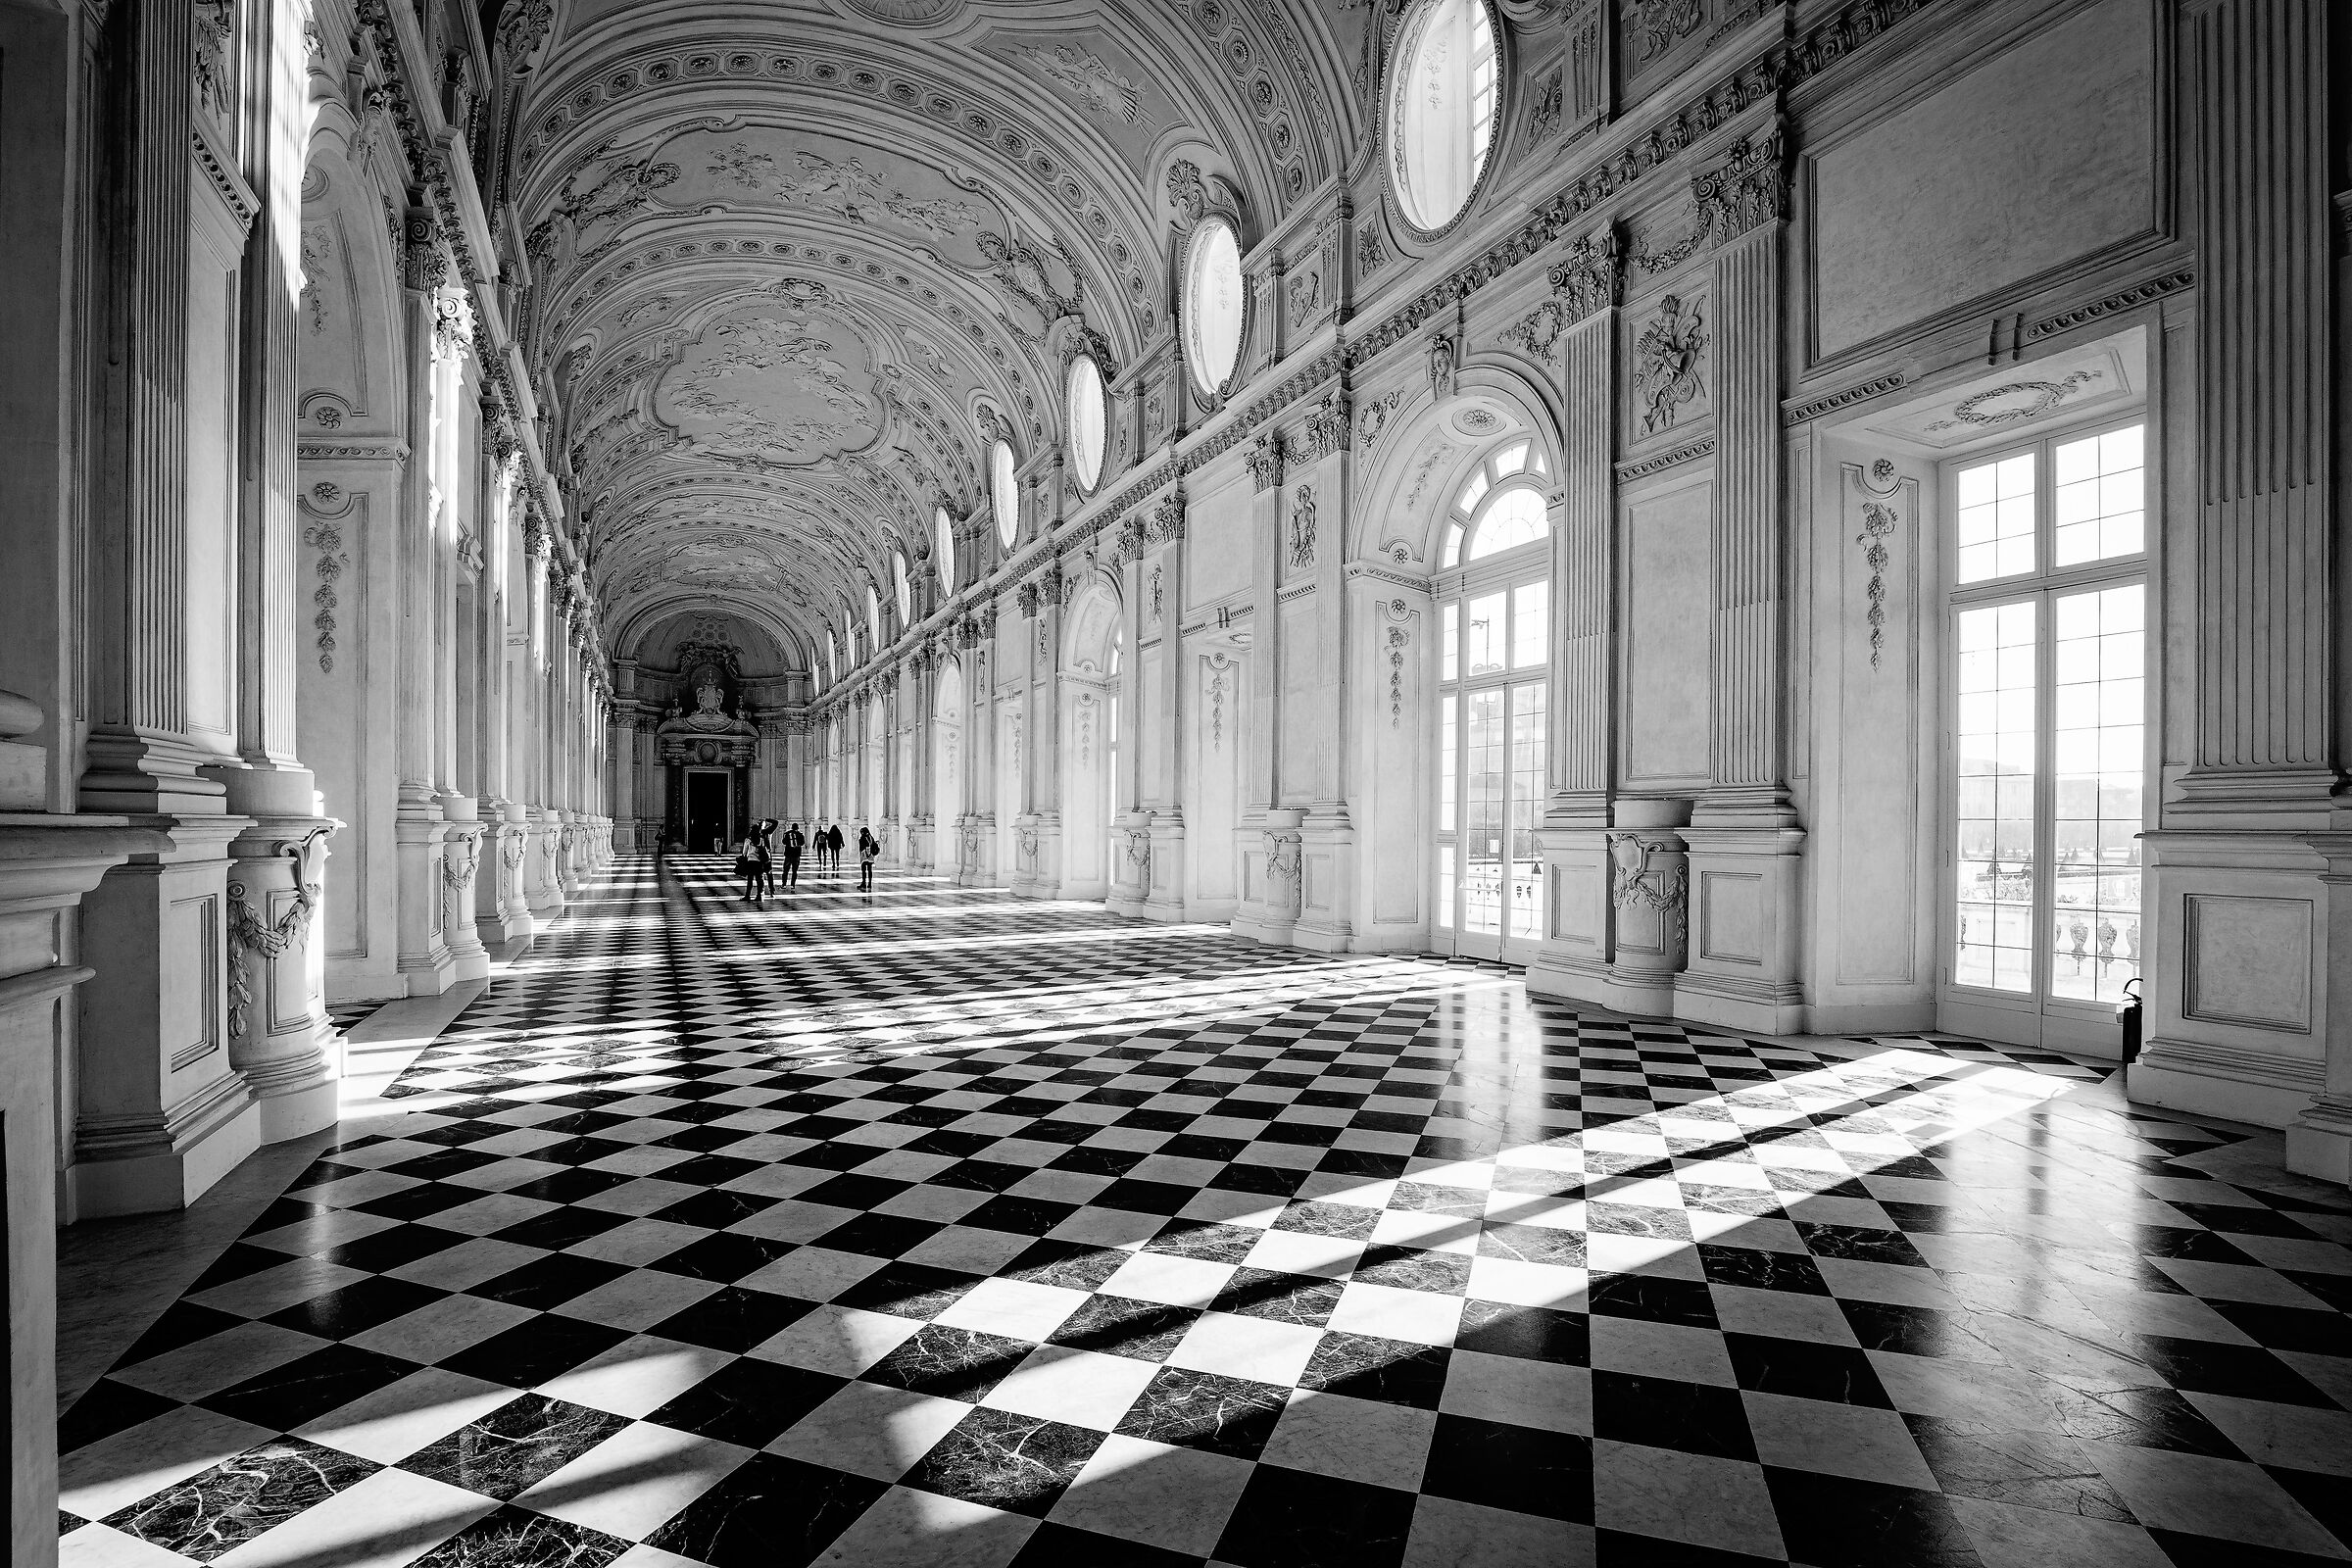 The checkered room...